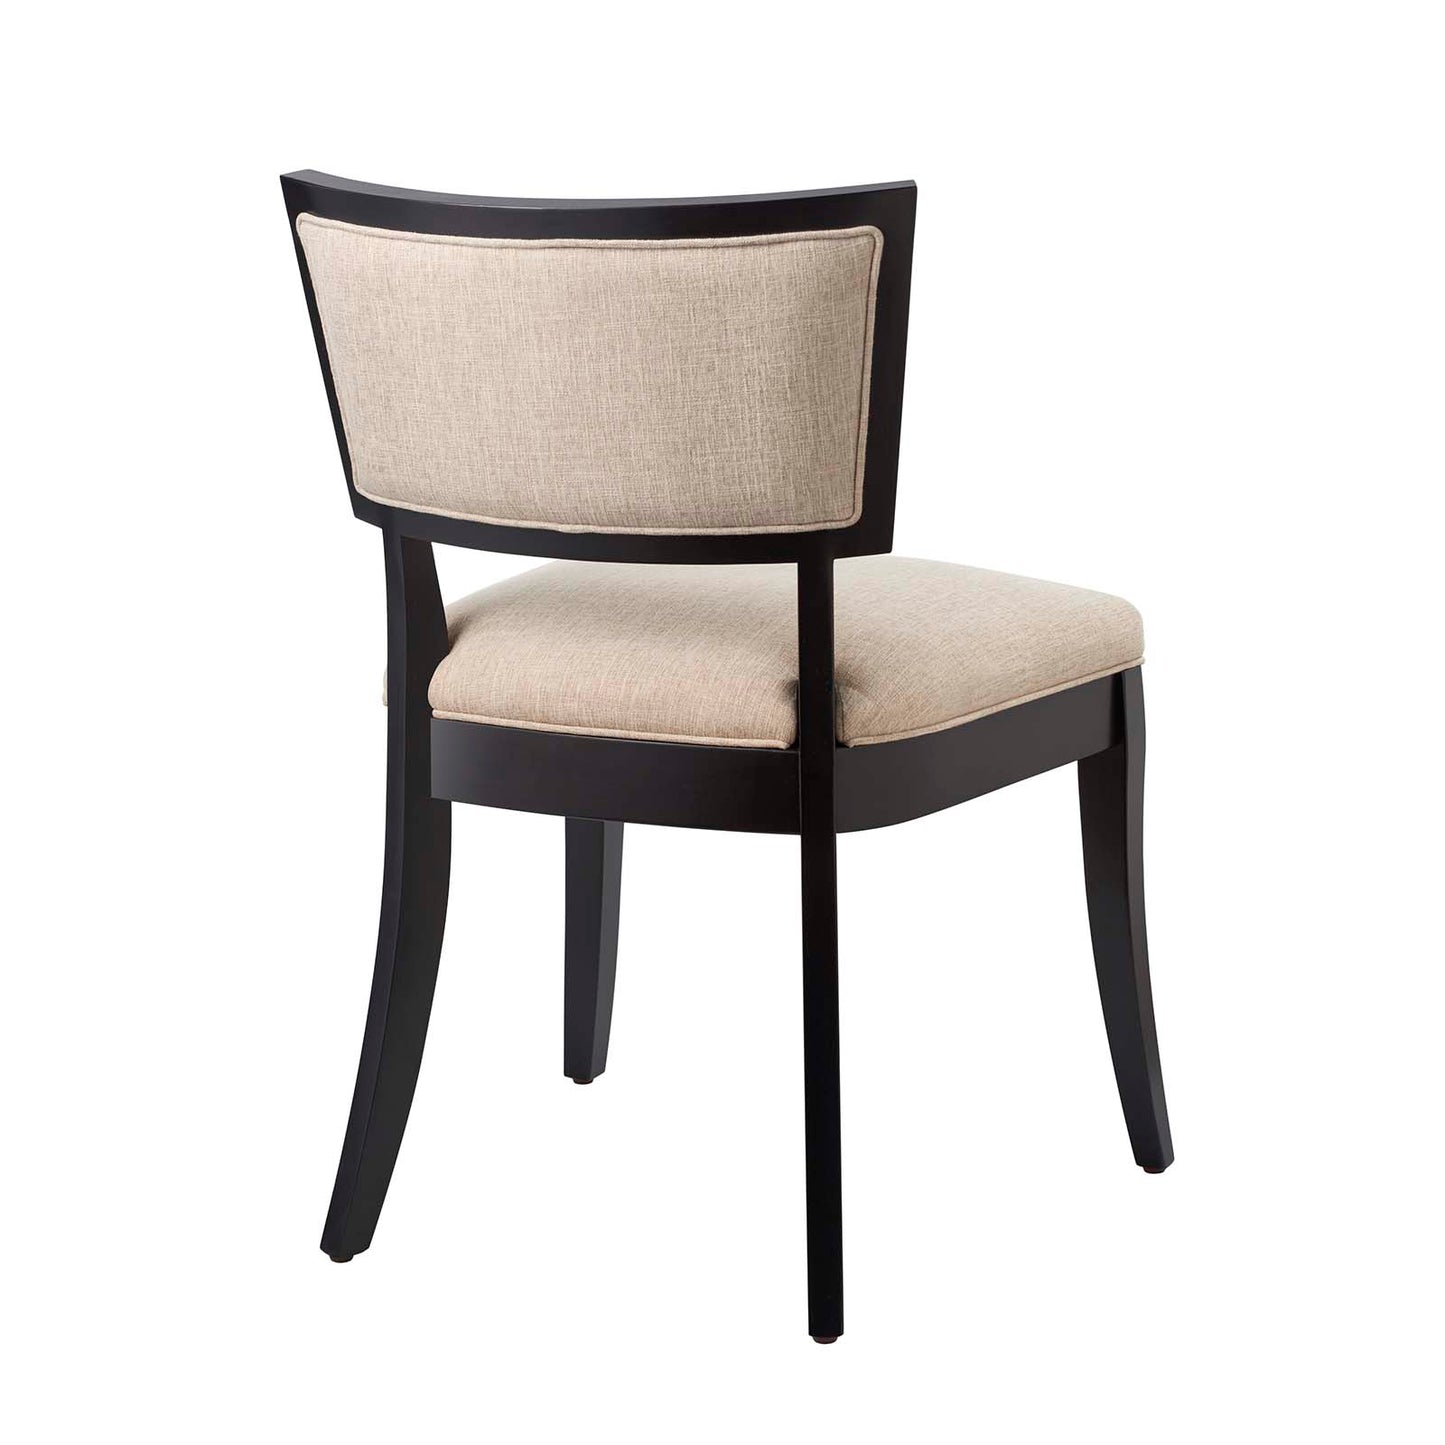 Pristine Upholstered Fabric Dining Chairs - Set of 2 Beige EEI-4557-BEI